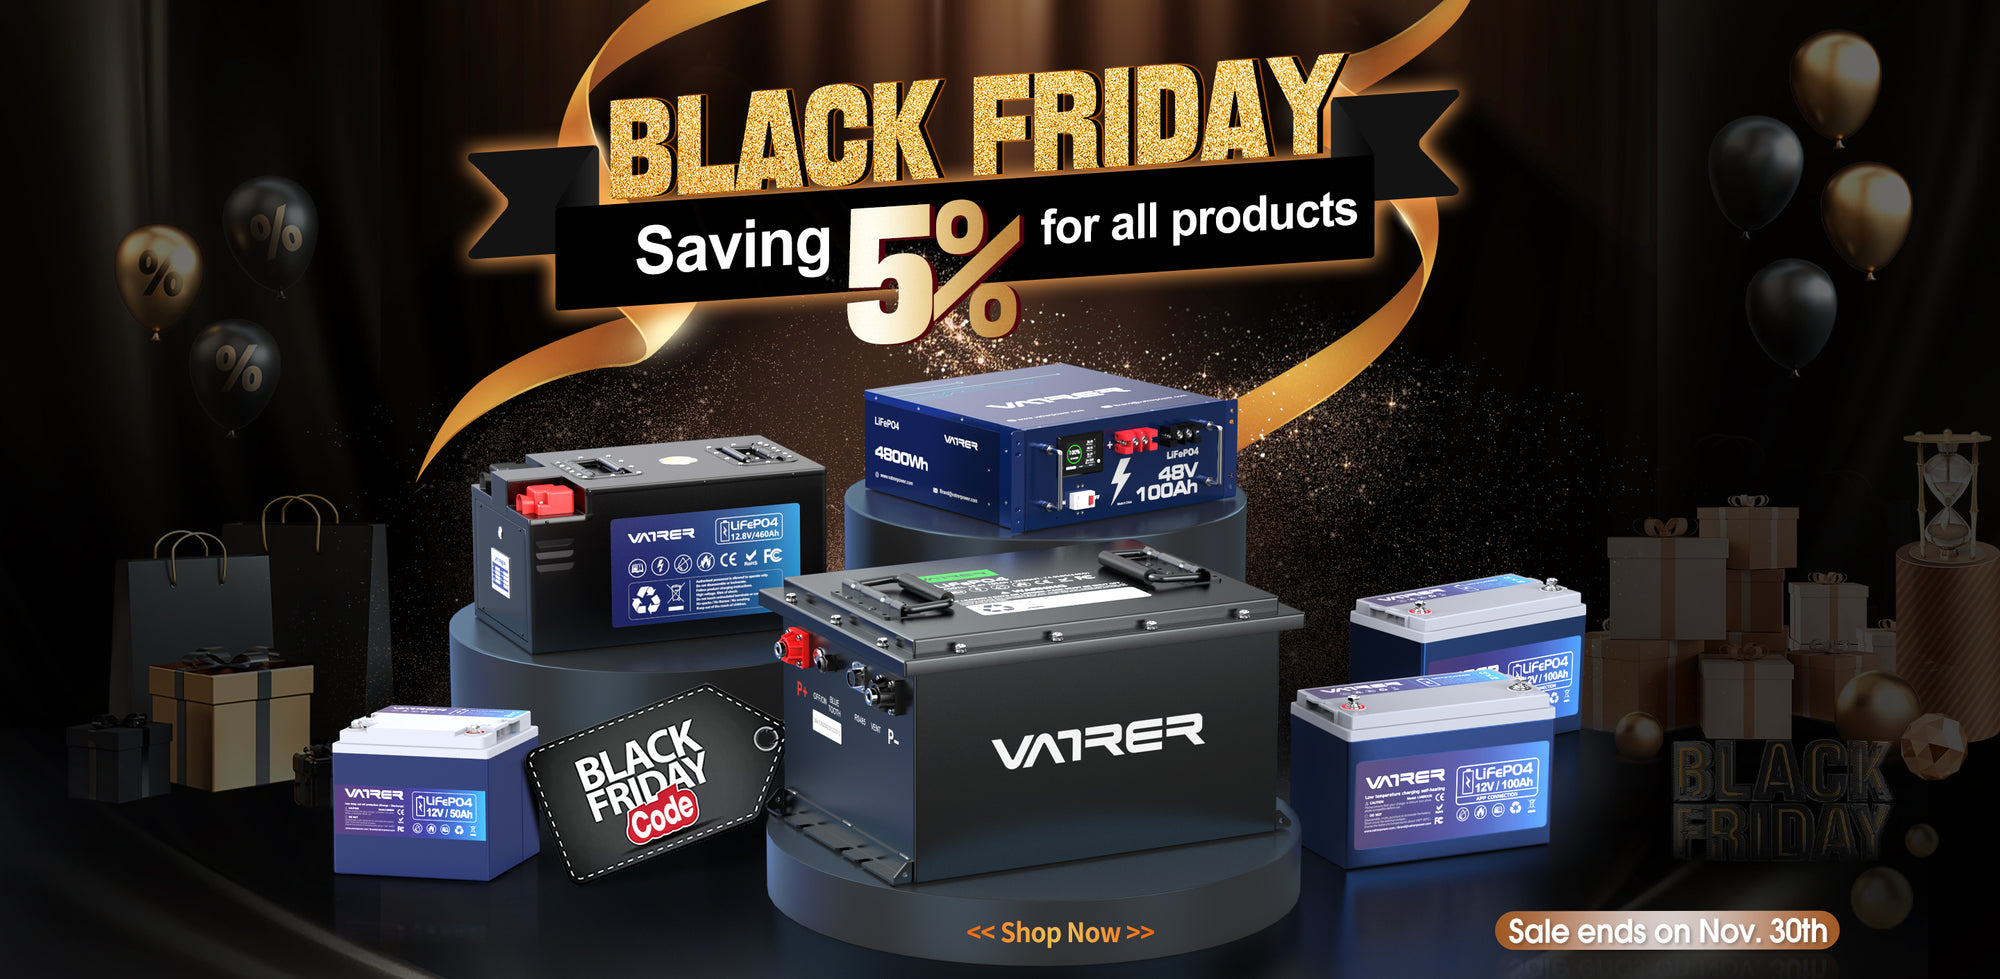 Black Friday, 5% Discount for All Products 9